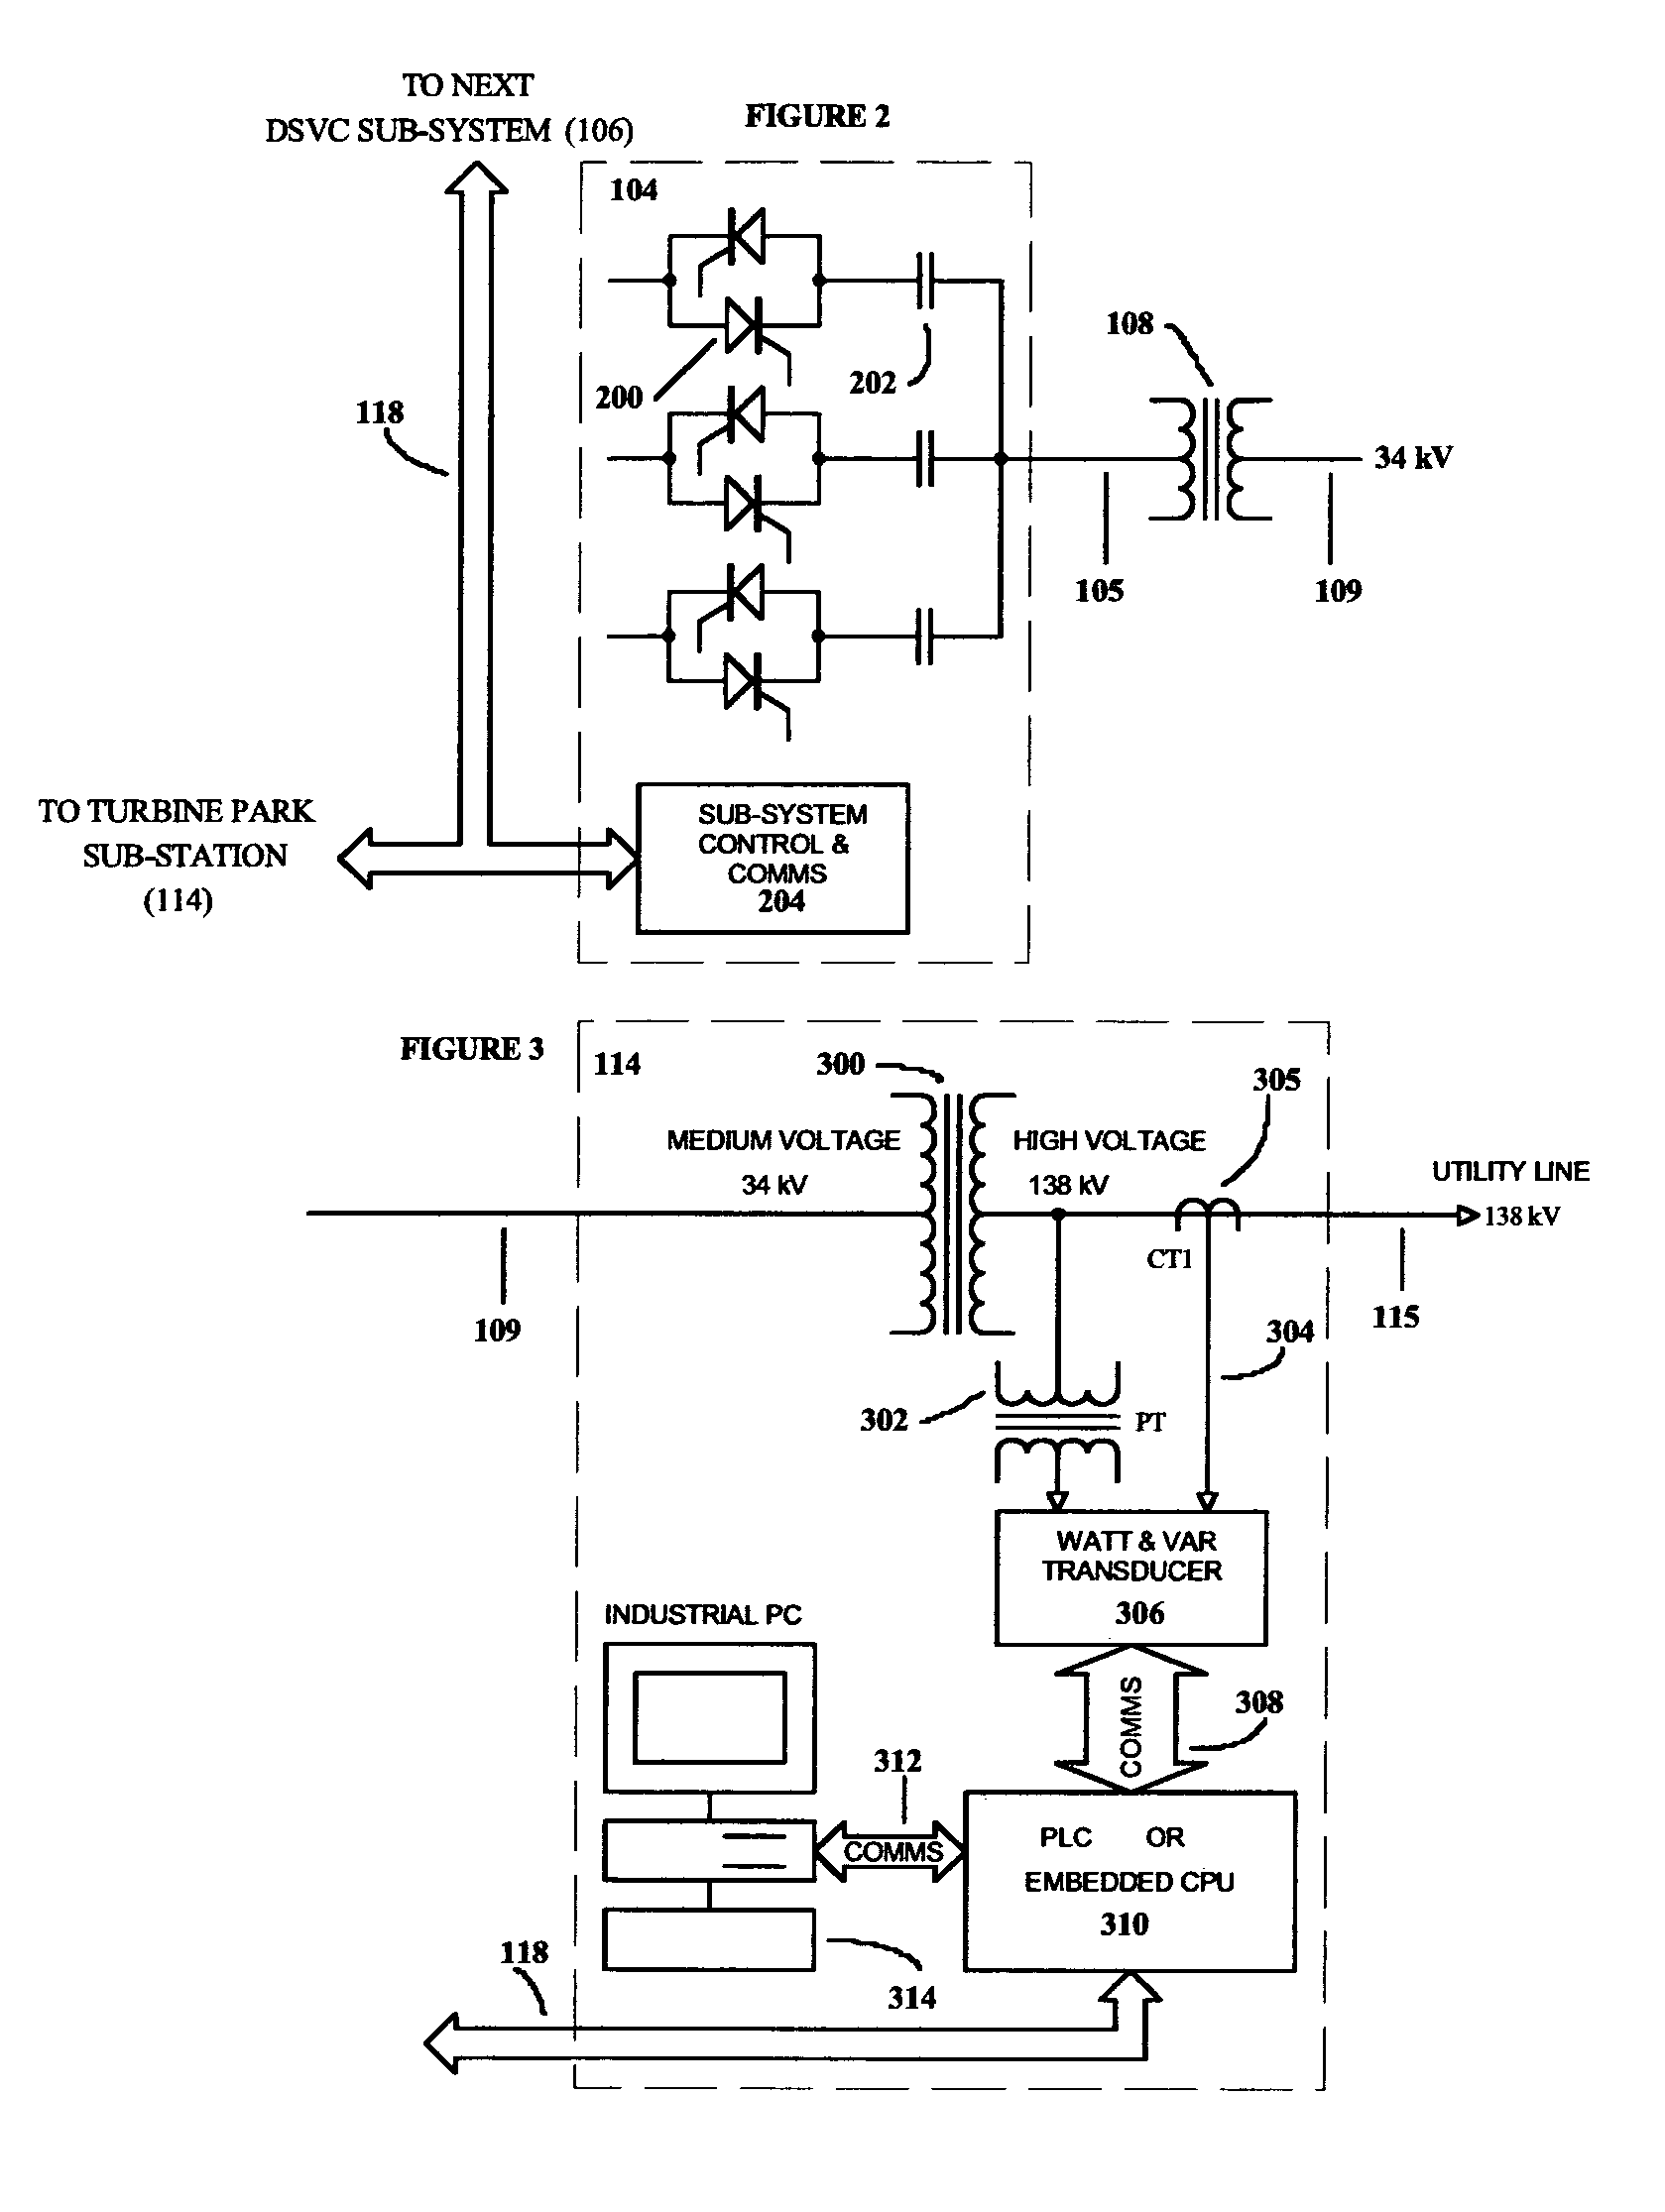 Distributed static var compensation (DSVC) system for wind and water turbine applications